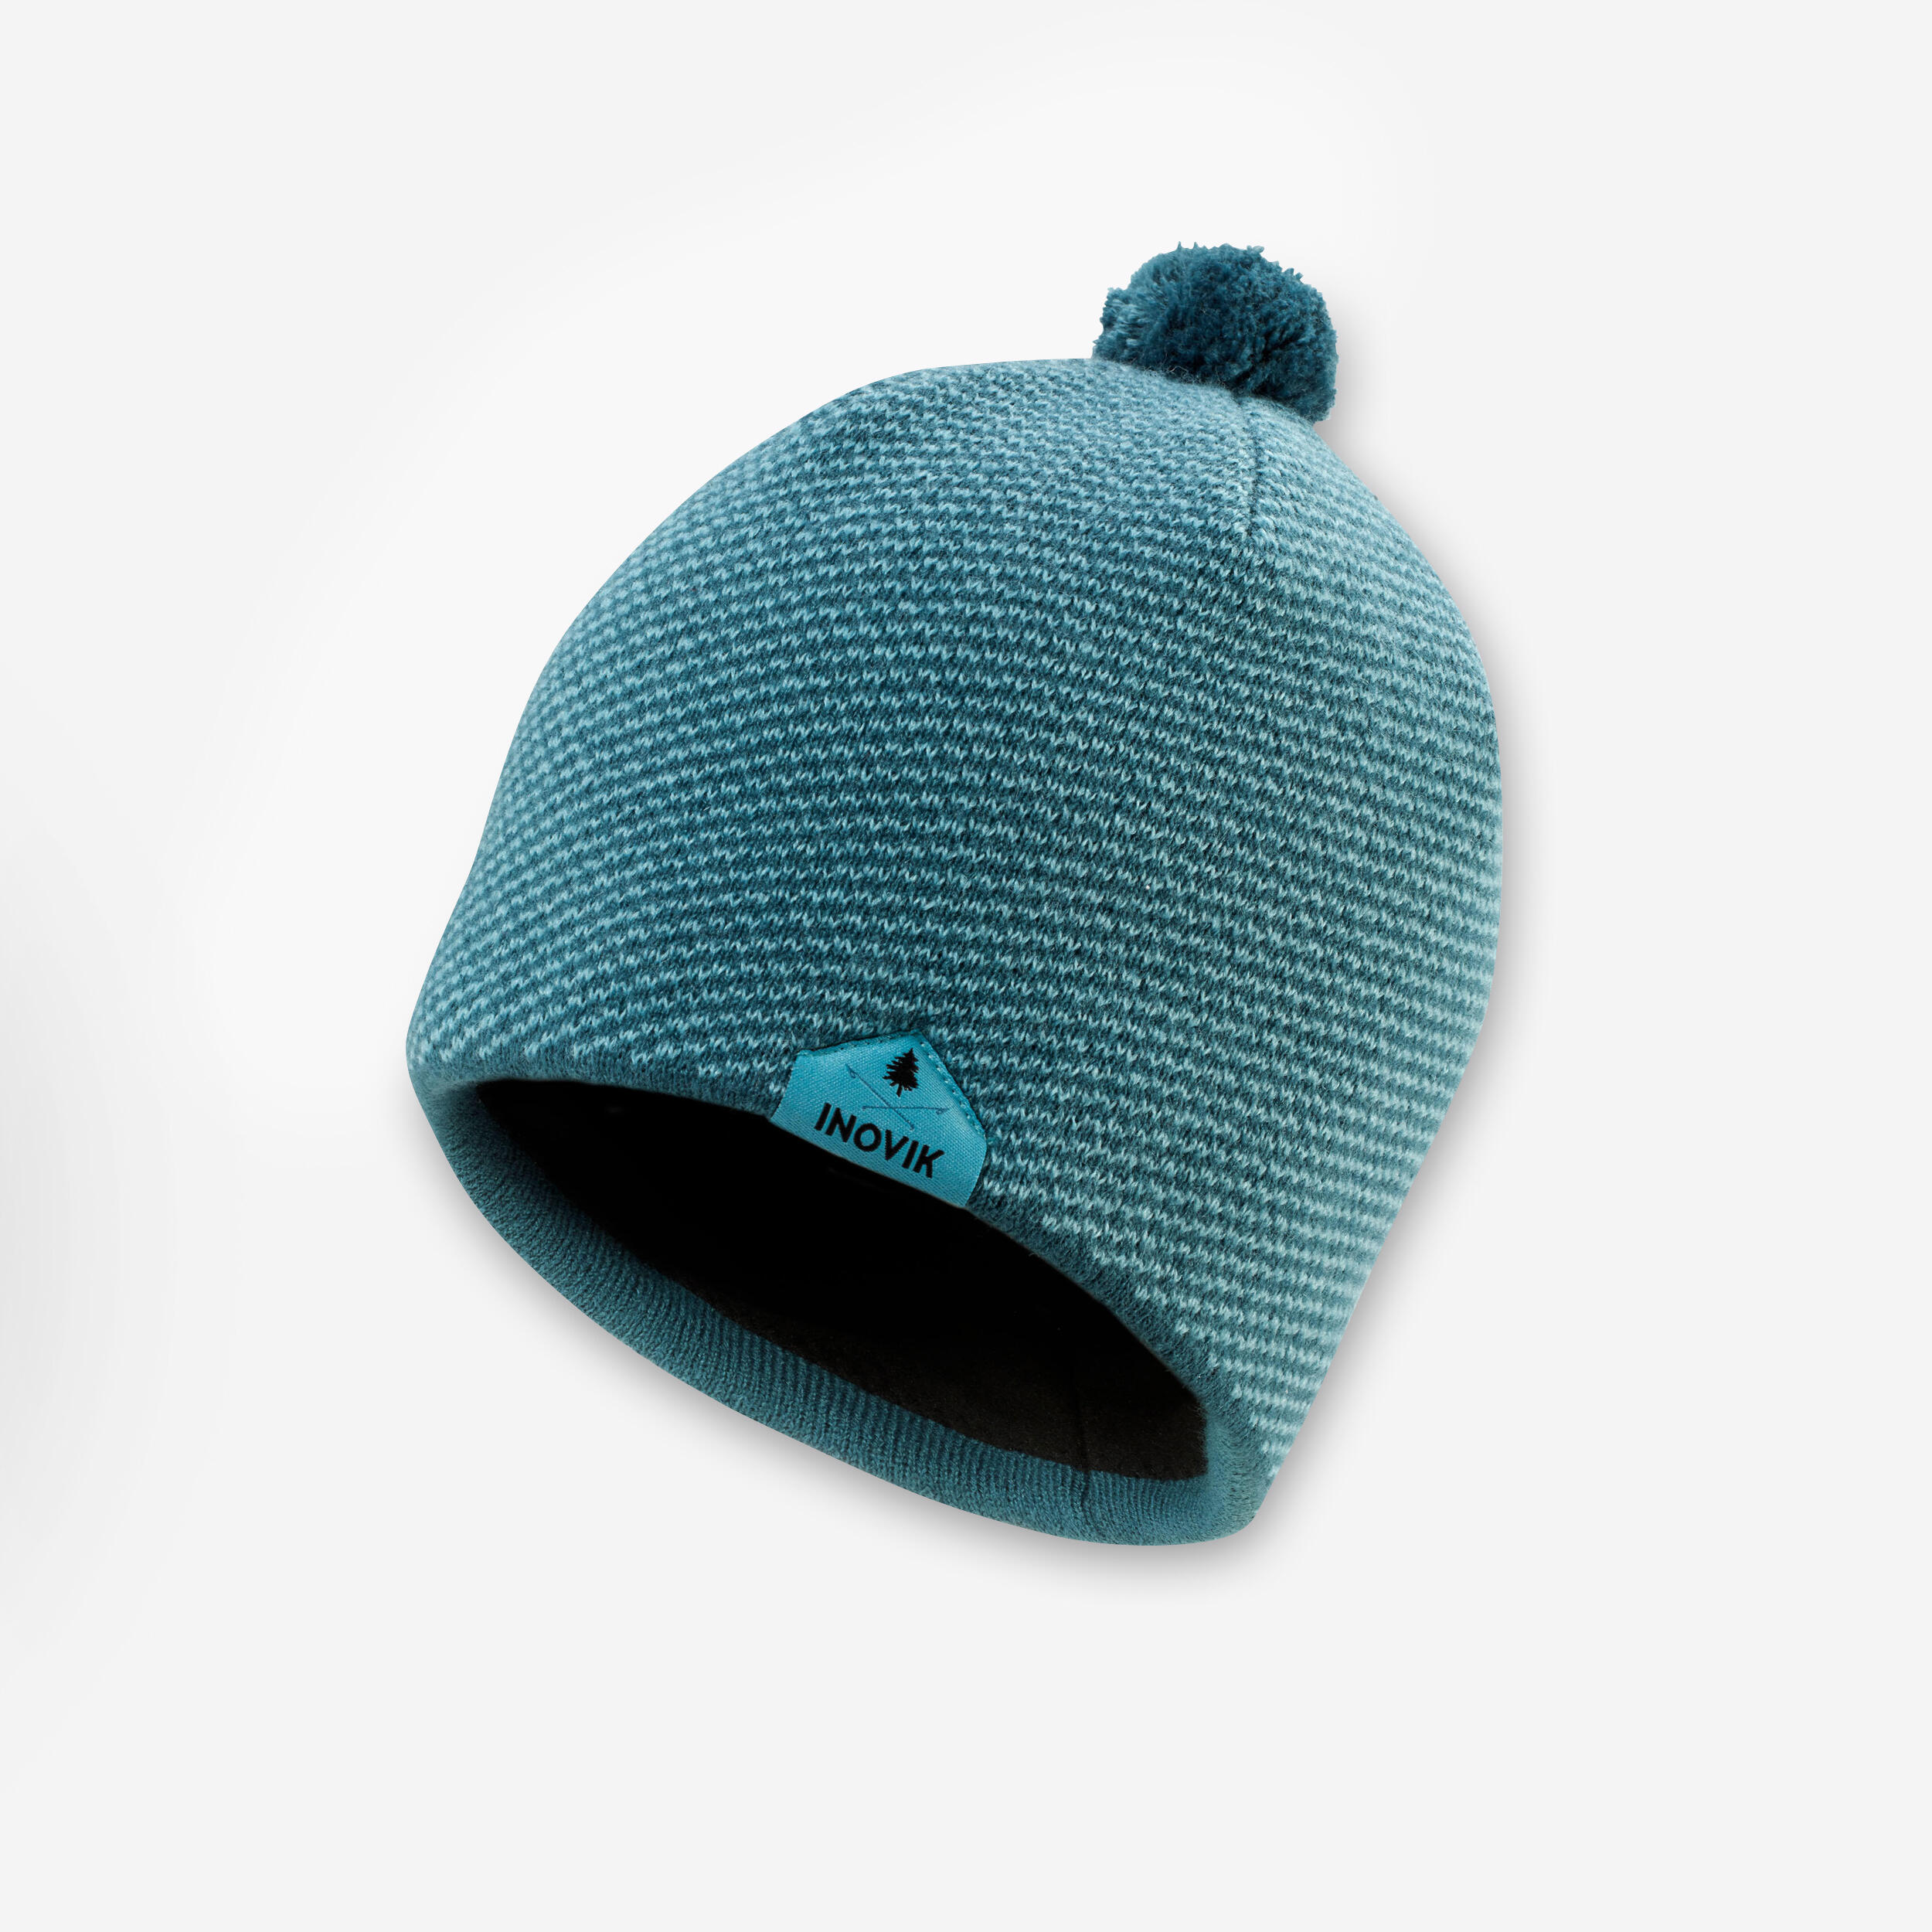 Image of Kids’ Cross-Country Skiing Hat - 100